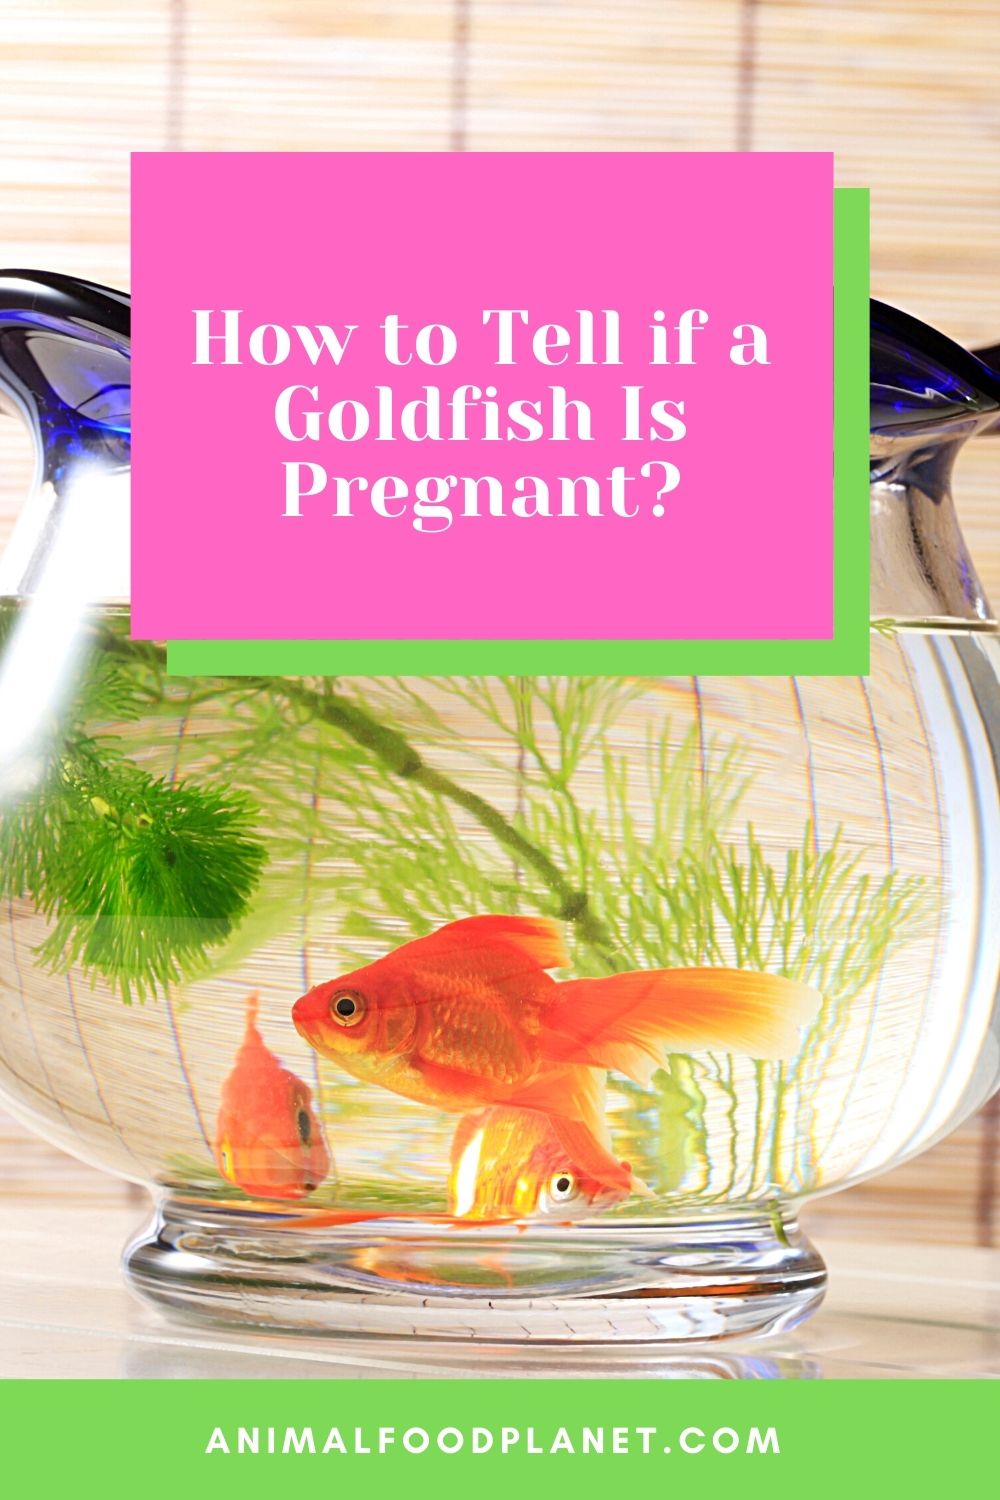 How to Tell if a Goldfish is Pregnant